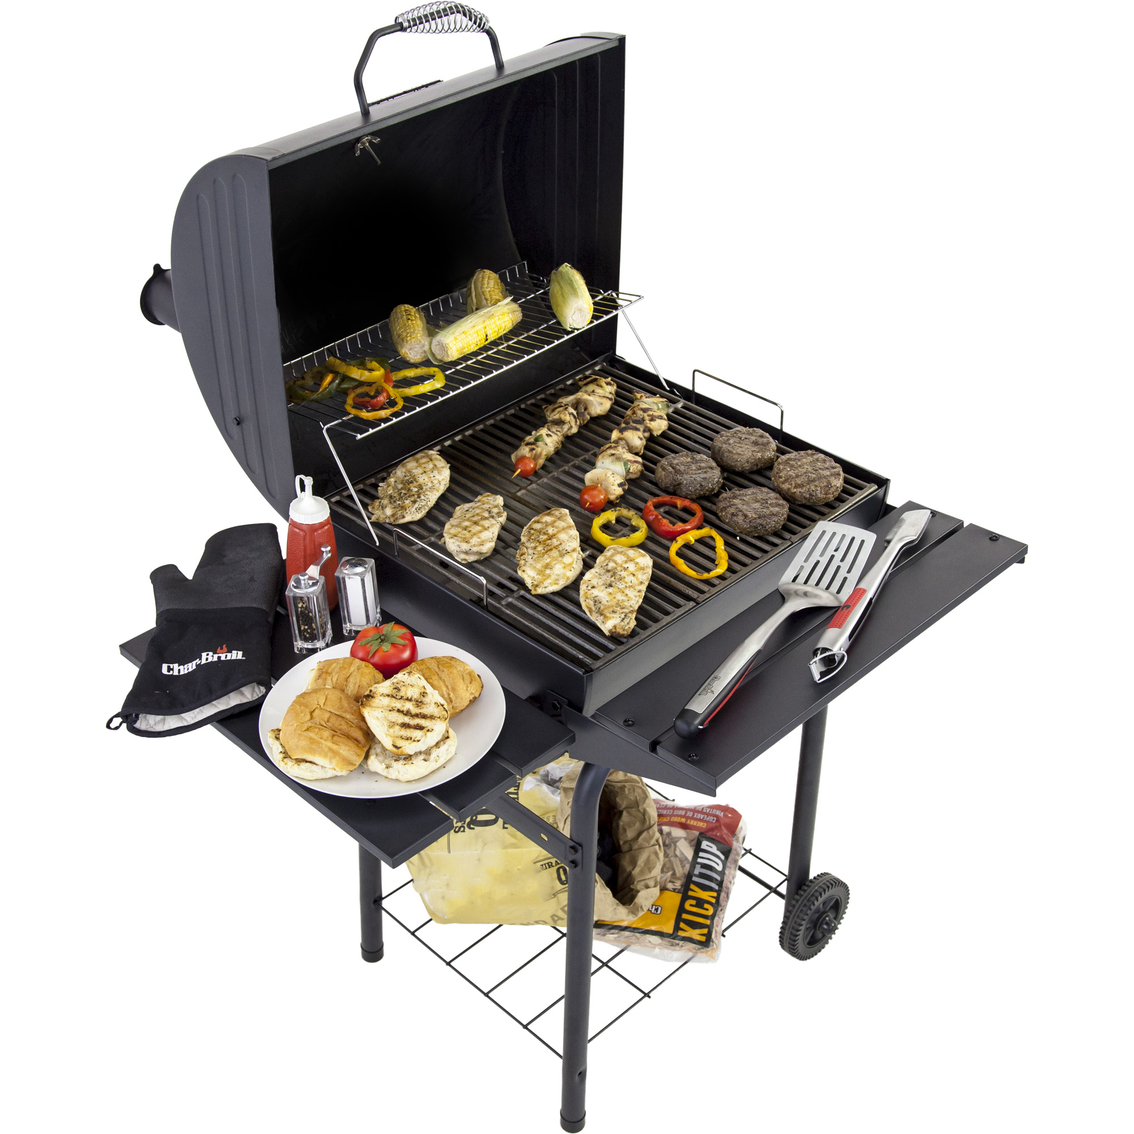 Char-Broil 625 Charcoal Grill - Image 4 of 5